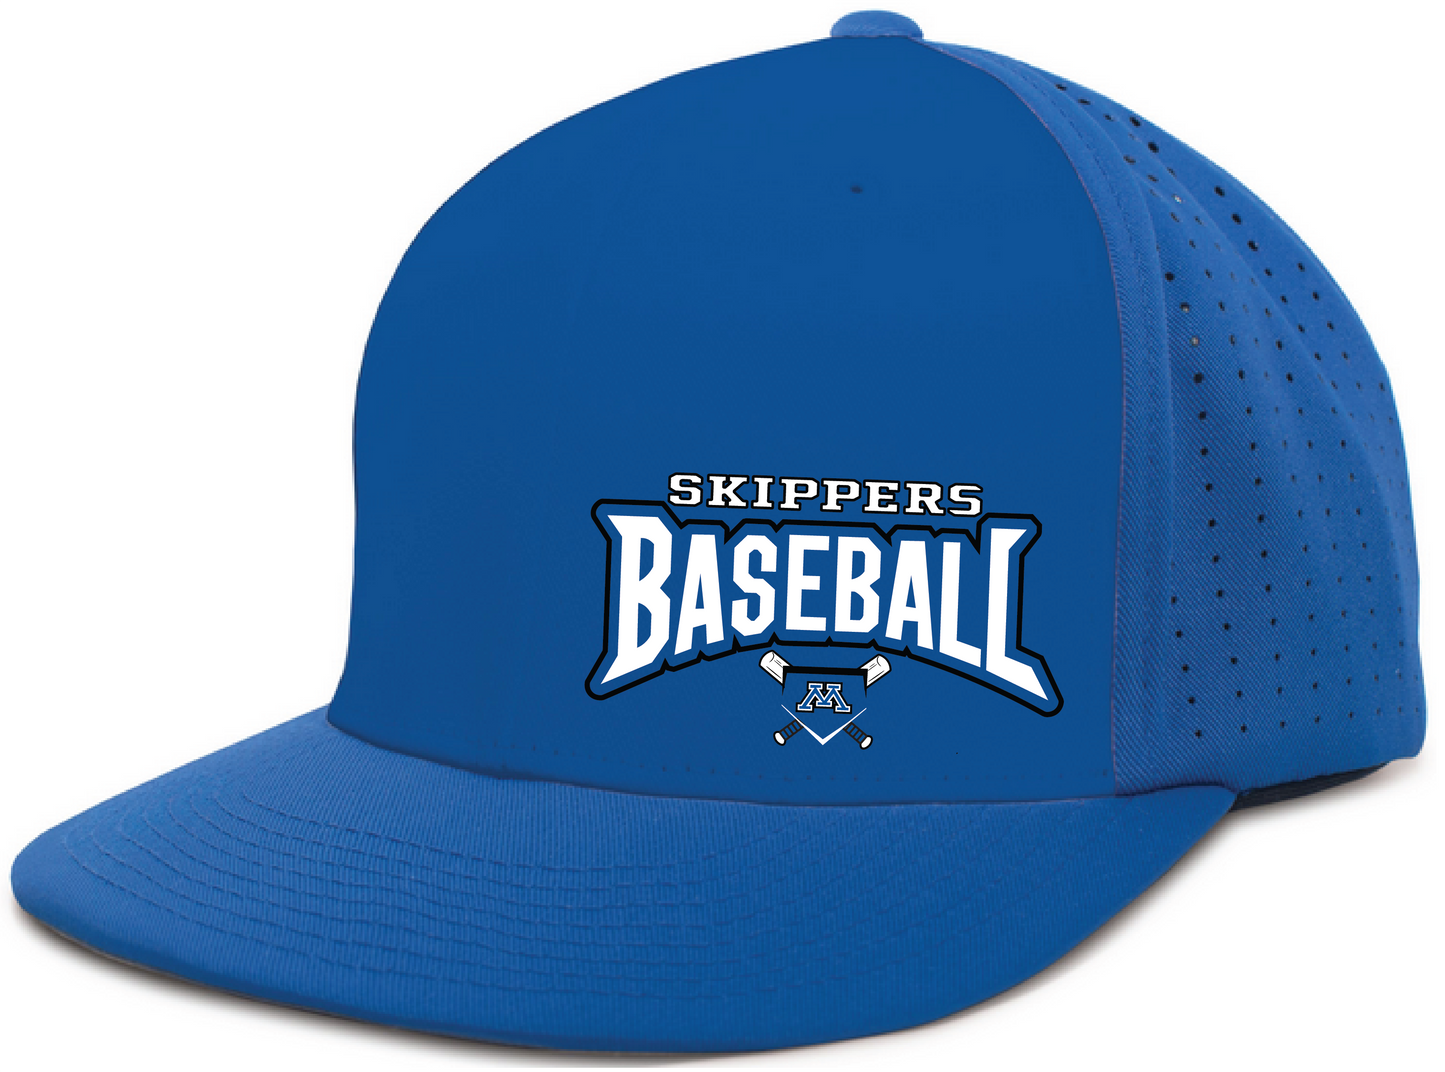 Baseball Perforated Flexfit Fitted Shape-able Flat Bill Hat